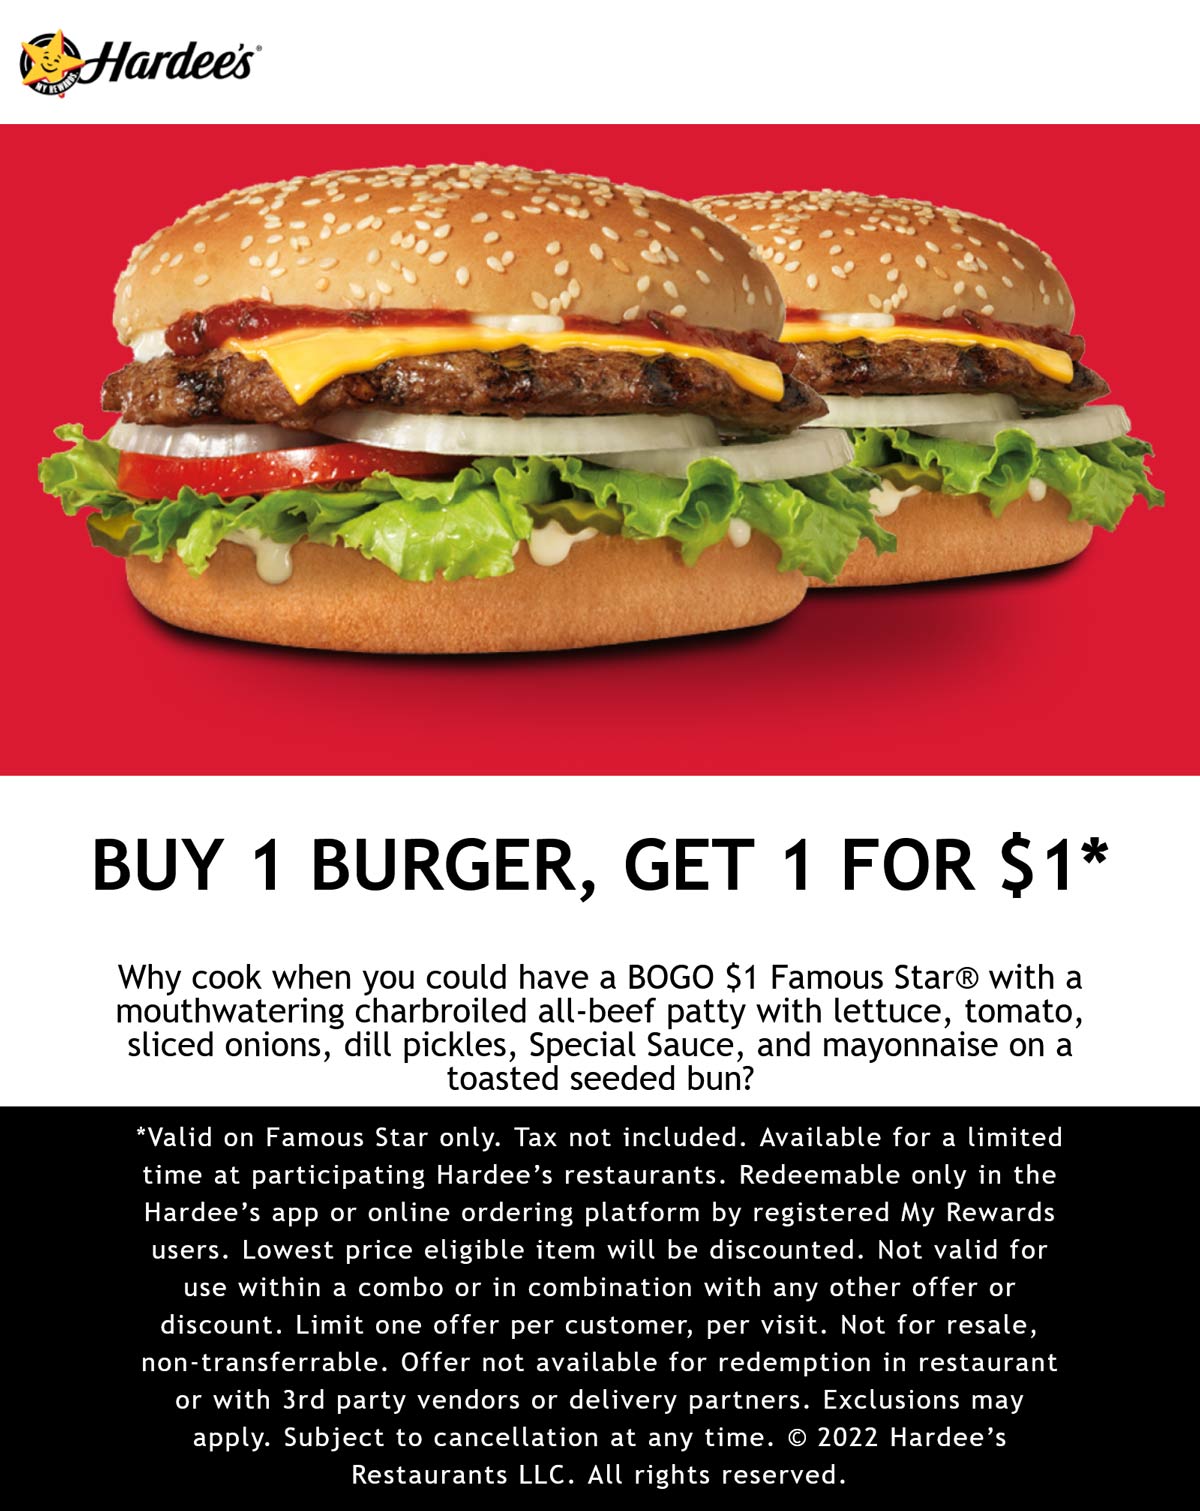 Hardees restaurants Coupon  Second famous star cheeseburger for $1 at Hardees #hardees 